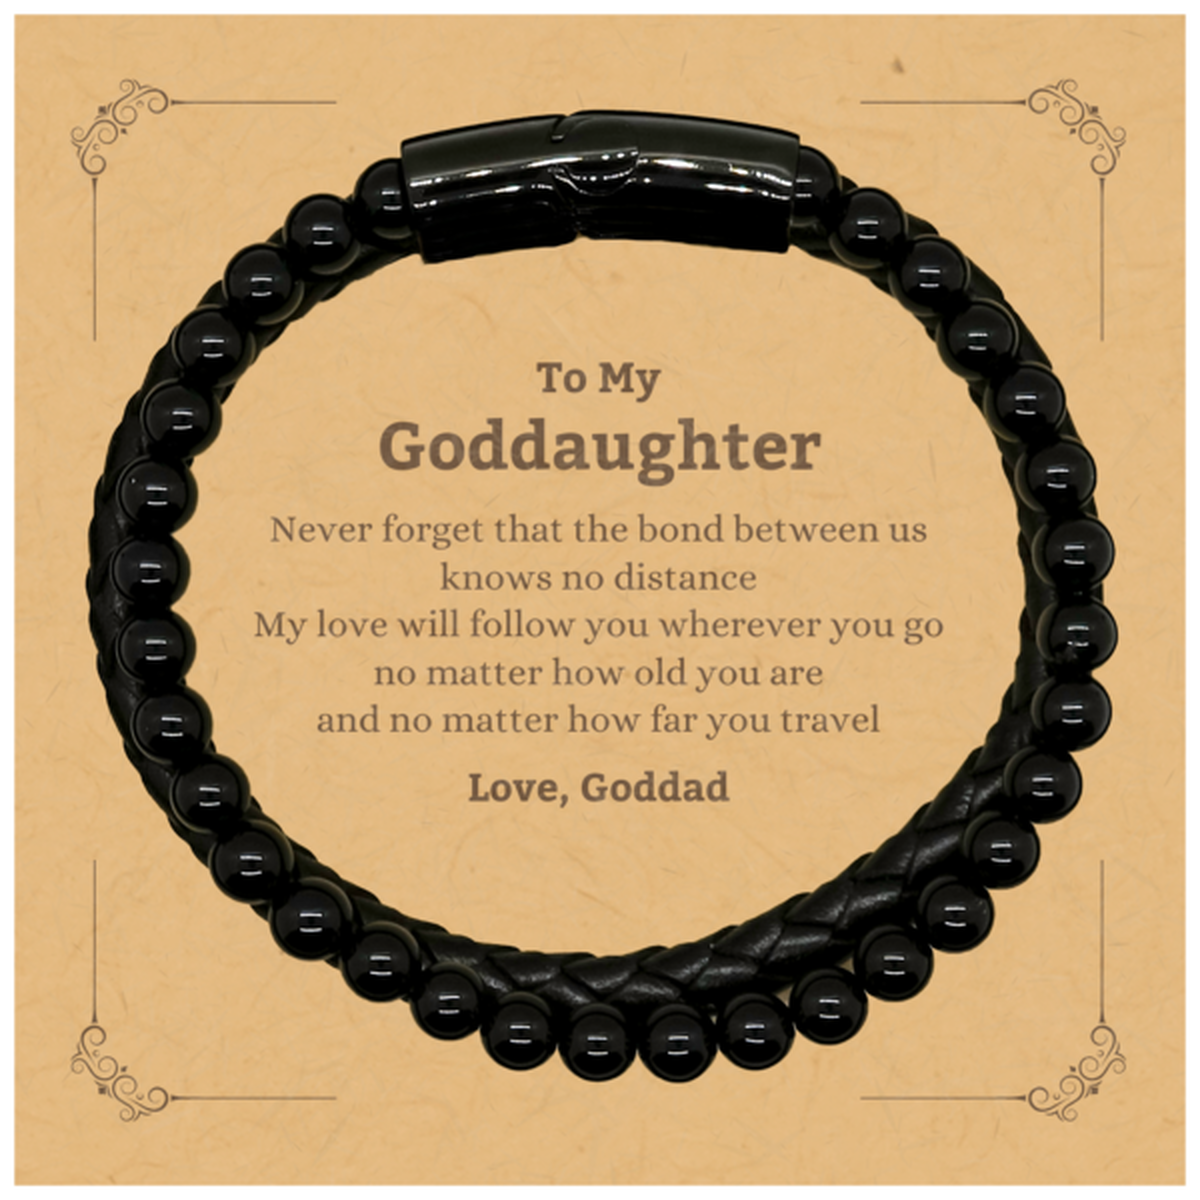 Goddaughter Birthday Gifts from Goddad, Adjustable Stone Leather Bracelets for Goddaughter Christmas Graduation Unique Gifts Goddaughter Never forget that the bond between us knows no distance. Love, Goddad